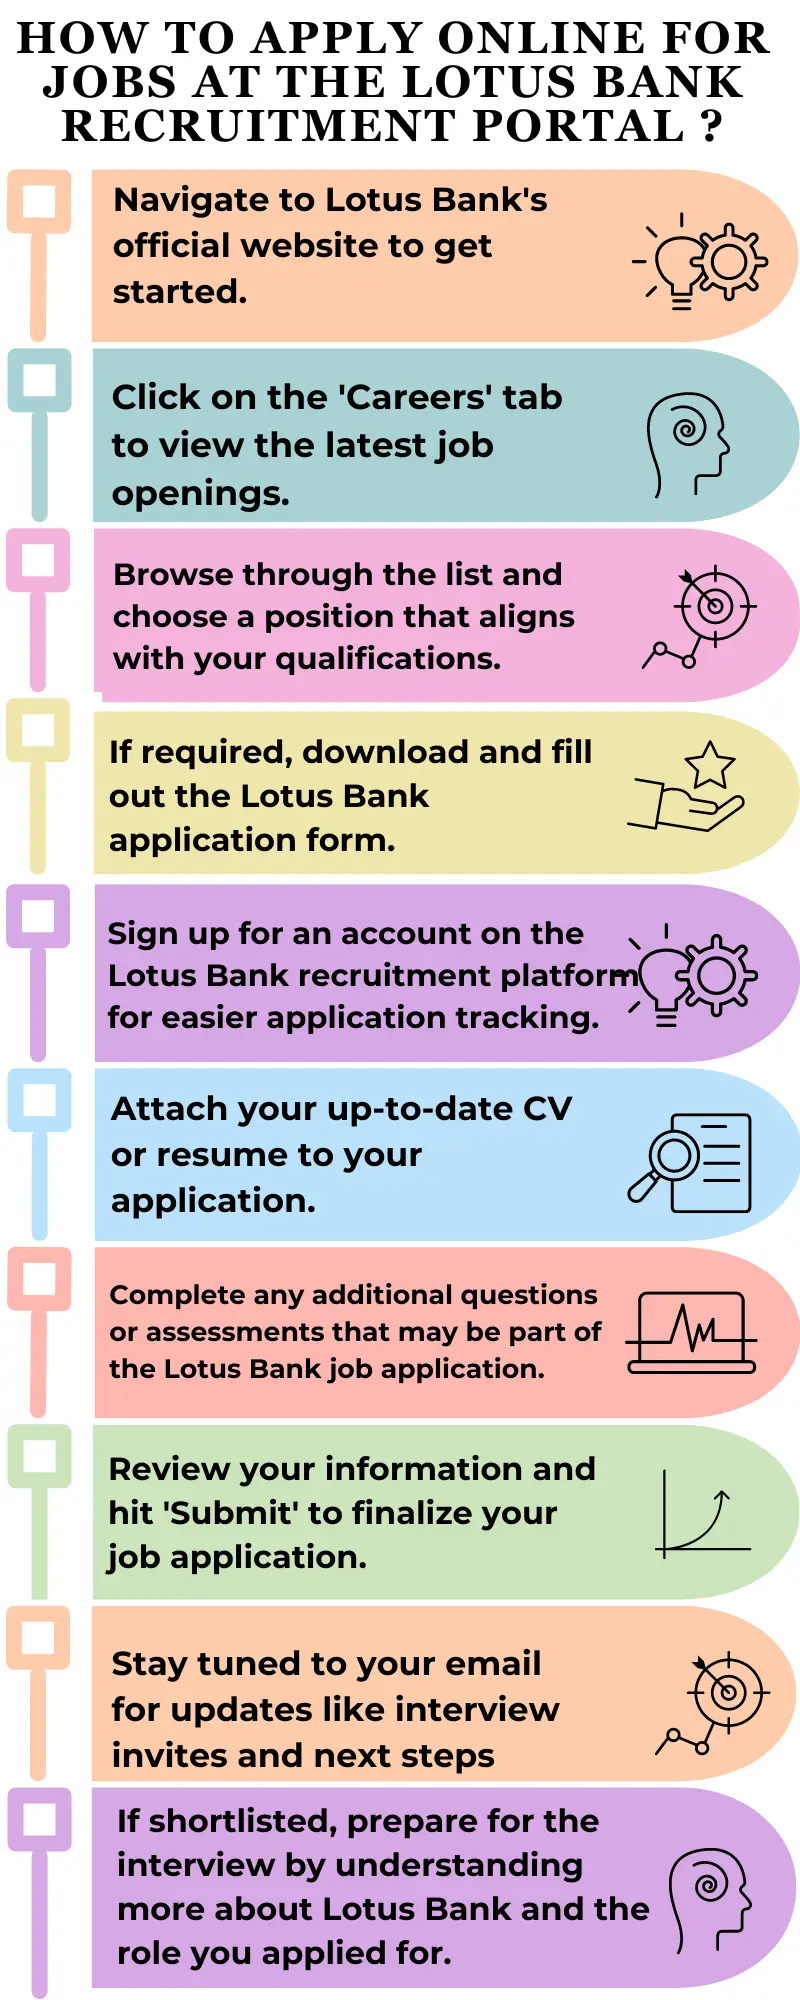 How to Apply Online for Jobs at the Lotus Bank Recruitment Portal ?